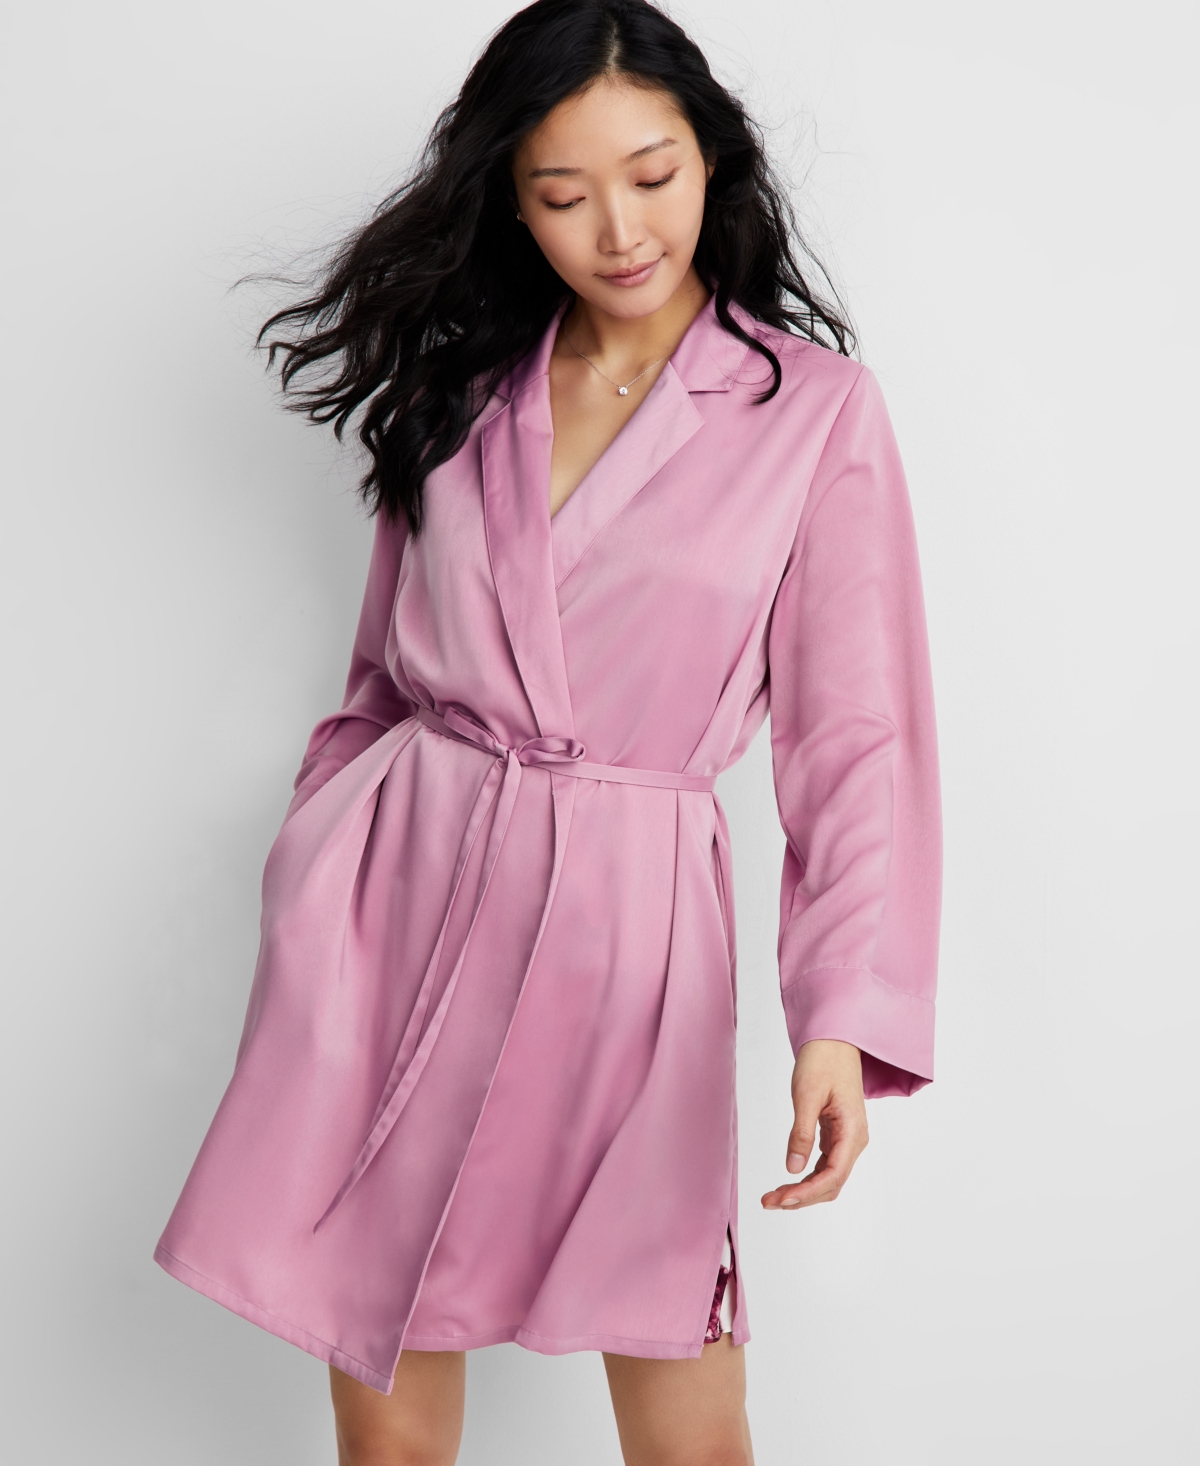 State Of Day Women's Crepe De Chine Self-tie Robe, Created For Macy's In Mauve Orchid